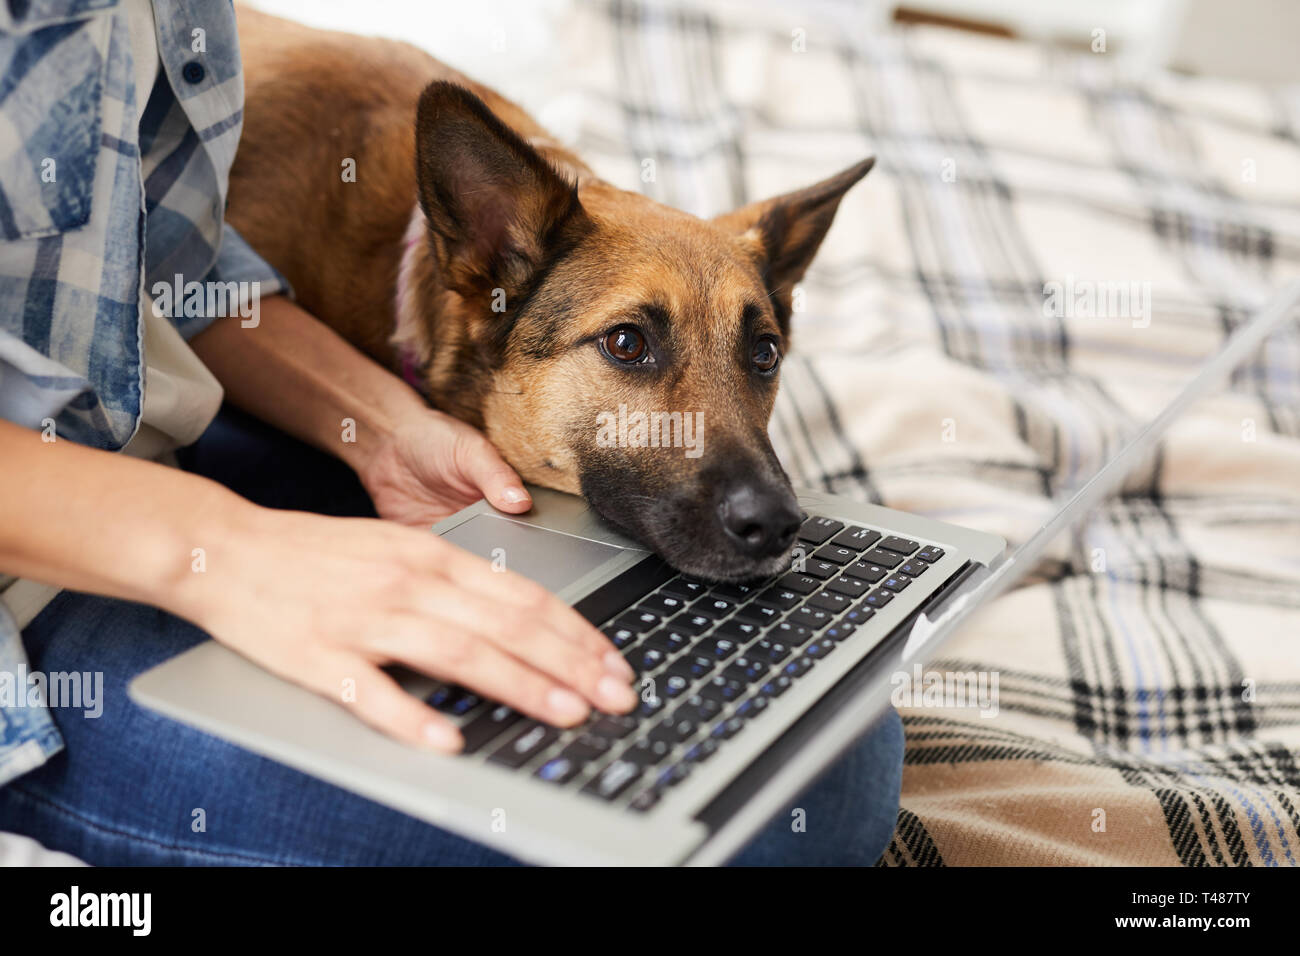 Bored Dog Waiting for Owner Stock Photo